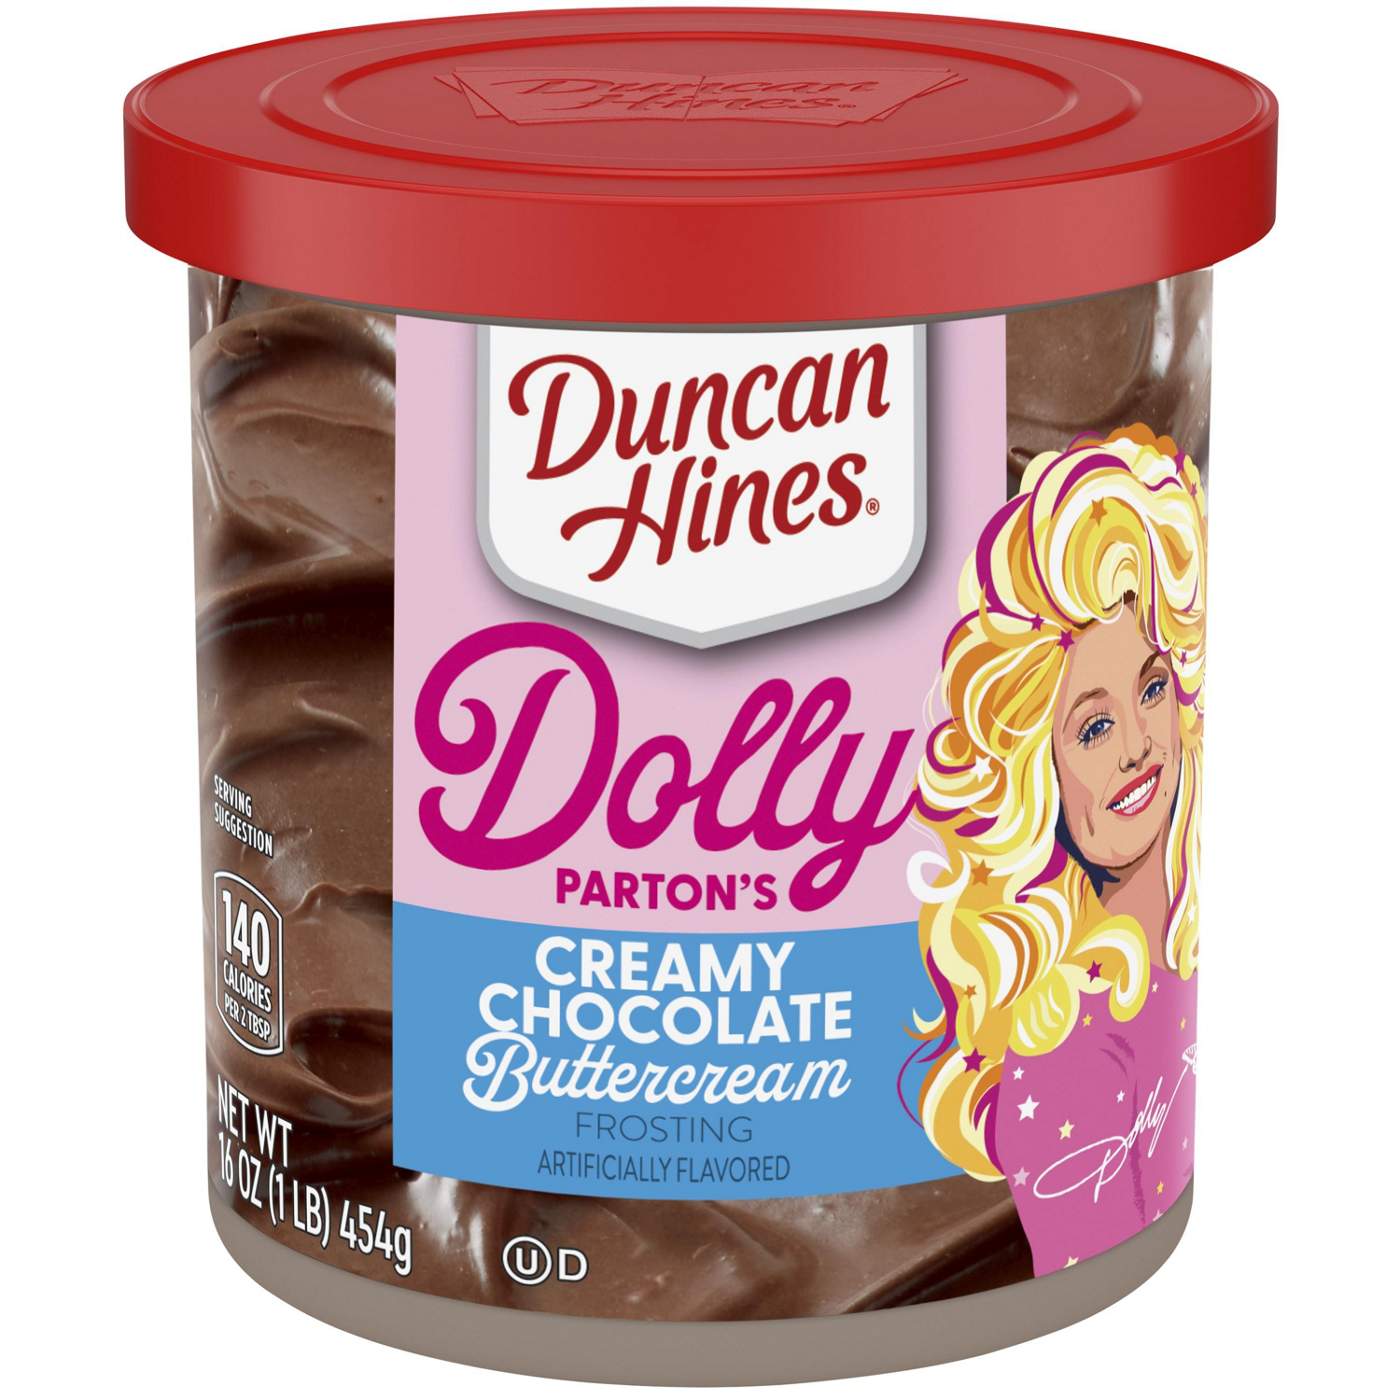 Duncan Hines Dolly Parton's Creamy Chocolate Buttercream Frosting; image 1 of 3